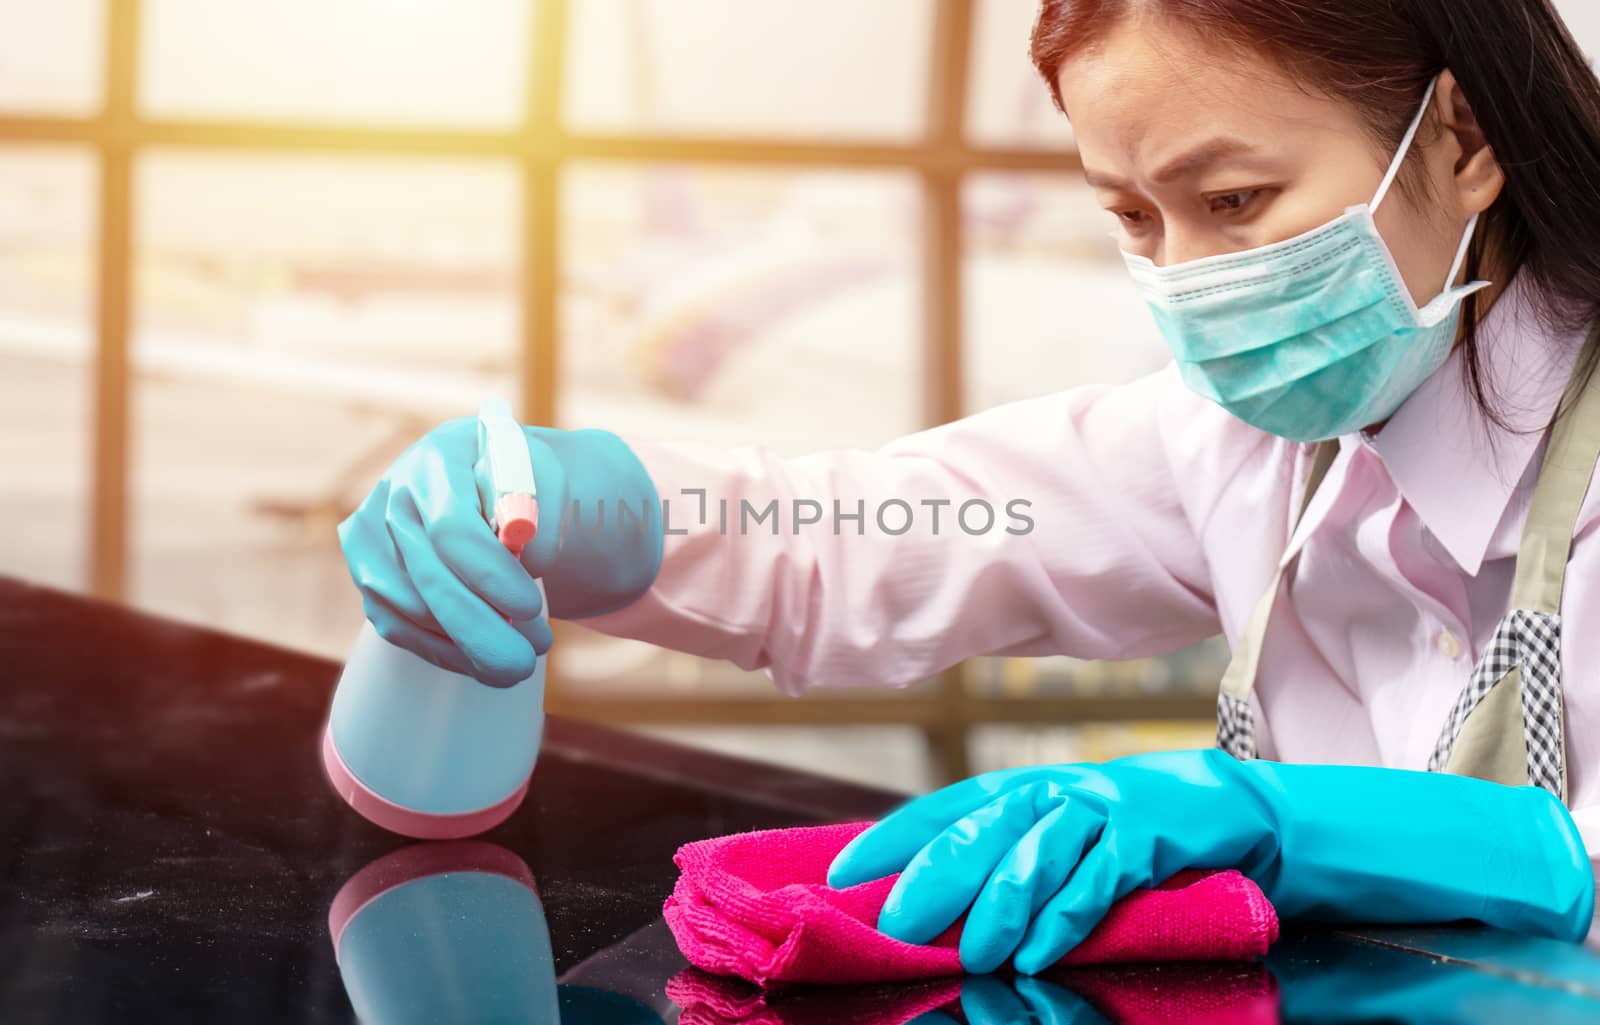 airport staff wearing hygienic face mask and blue rubber glove holding pink microfiber cleaning cloth and spray bottle with sterilizing solution make cleaning and disinfection for good hygiene around airport